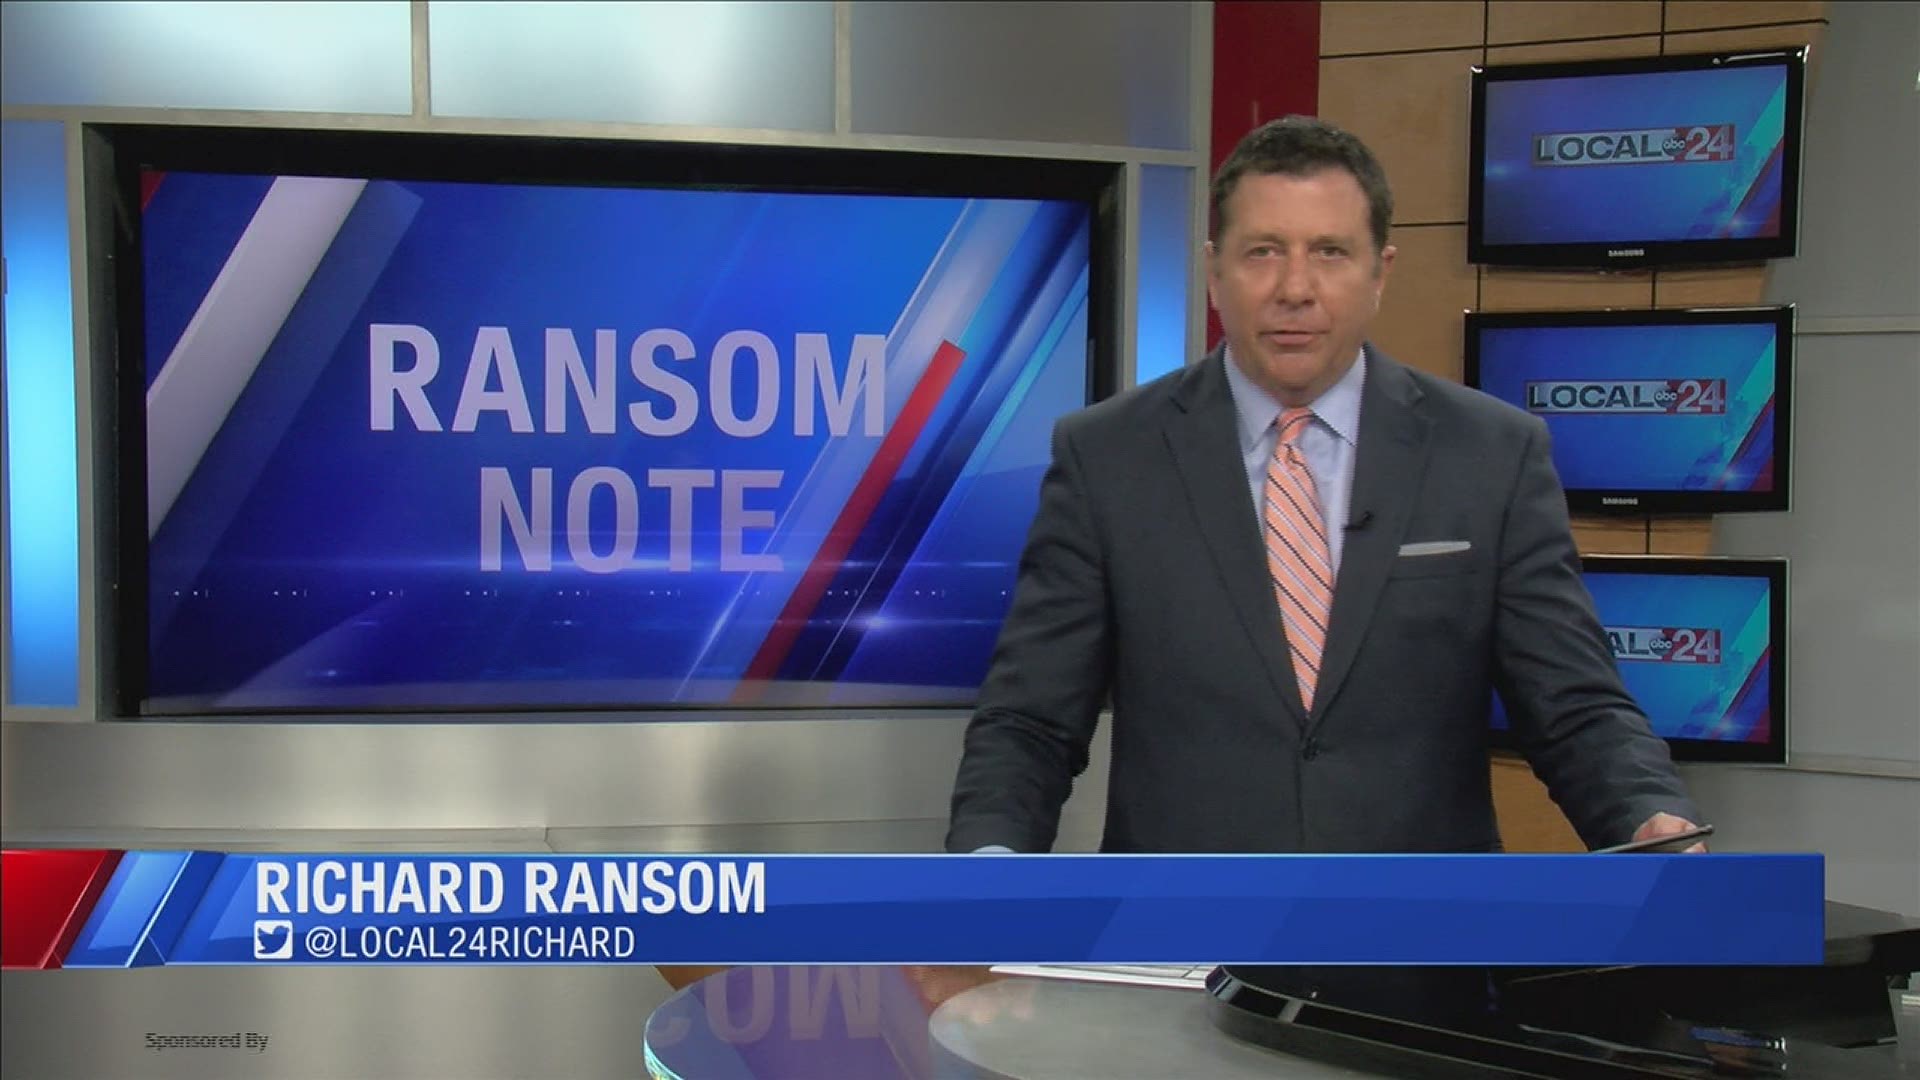 Local 24 News Anchor Richard Ransom looks at the issue in his Ransom Note.